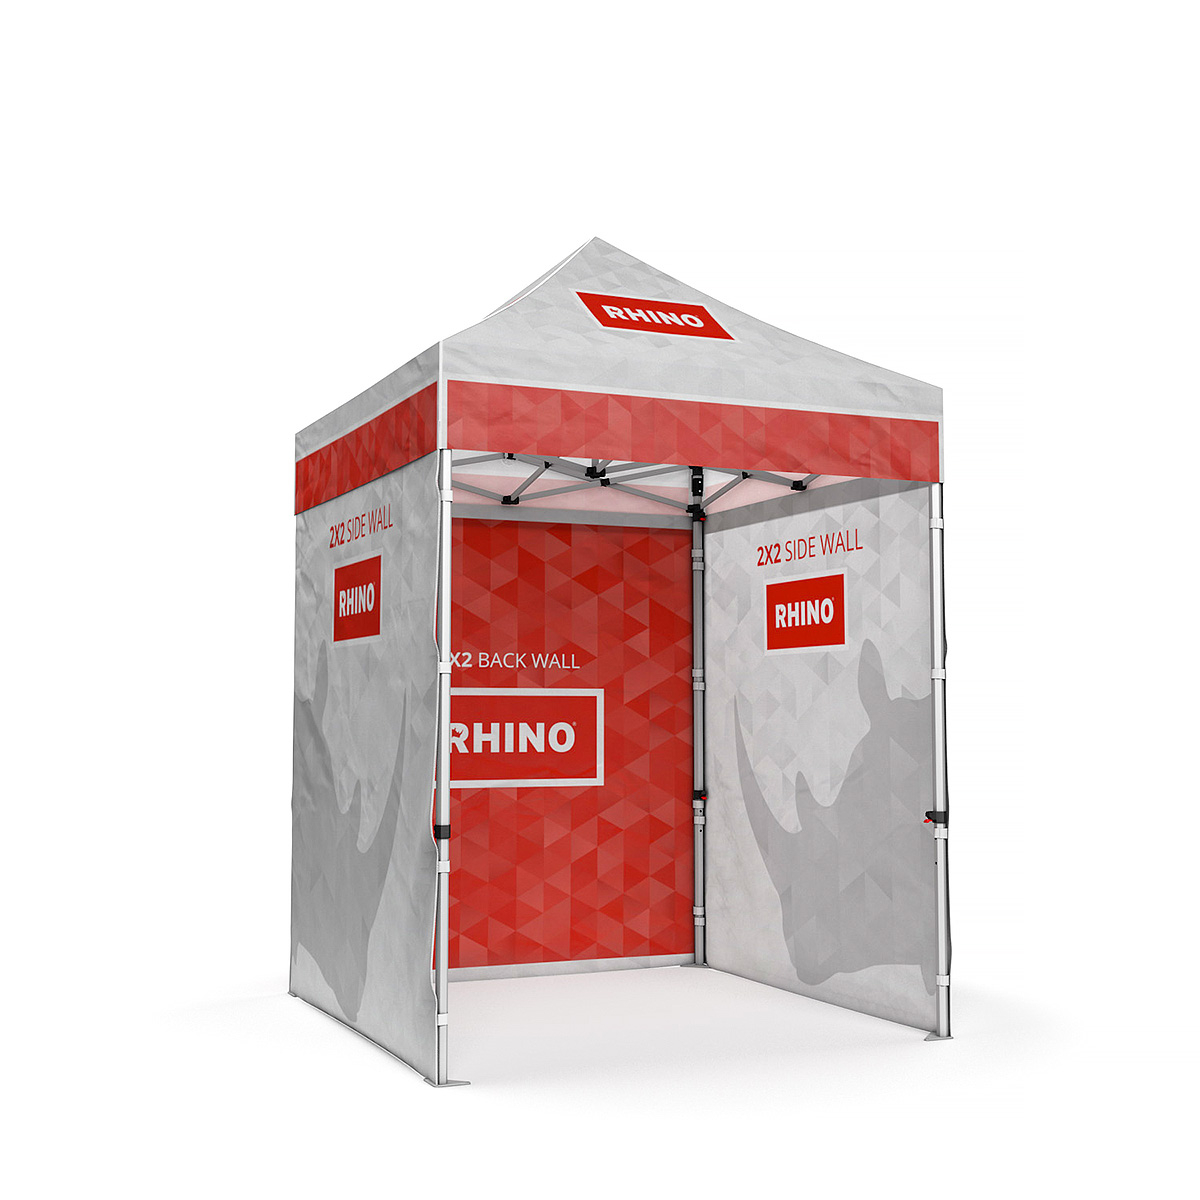 RHINO® 2x2 Promotional Tents With Three Fully Branded Walls